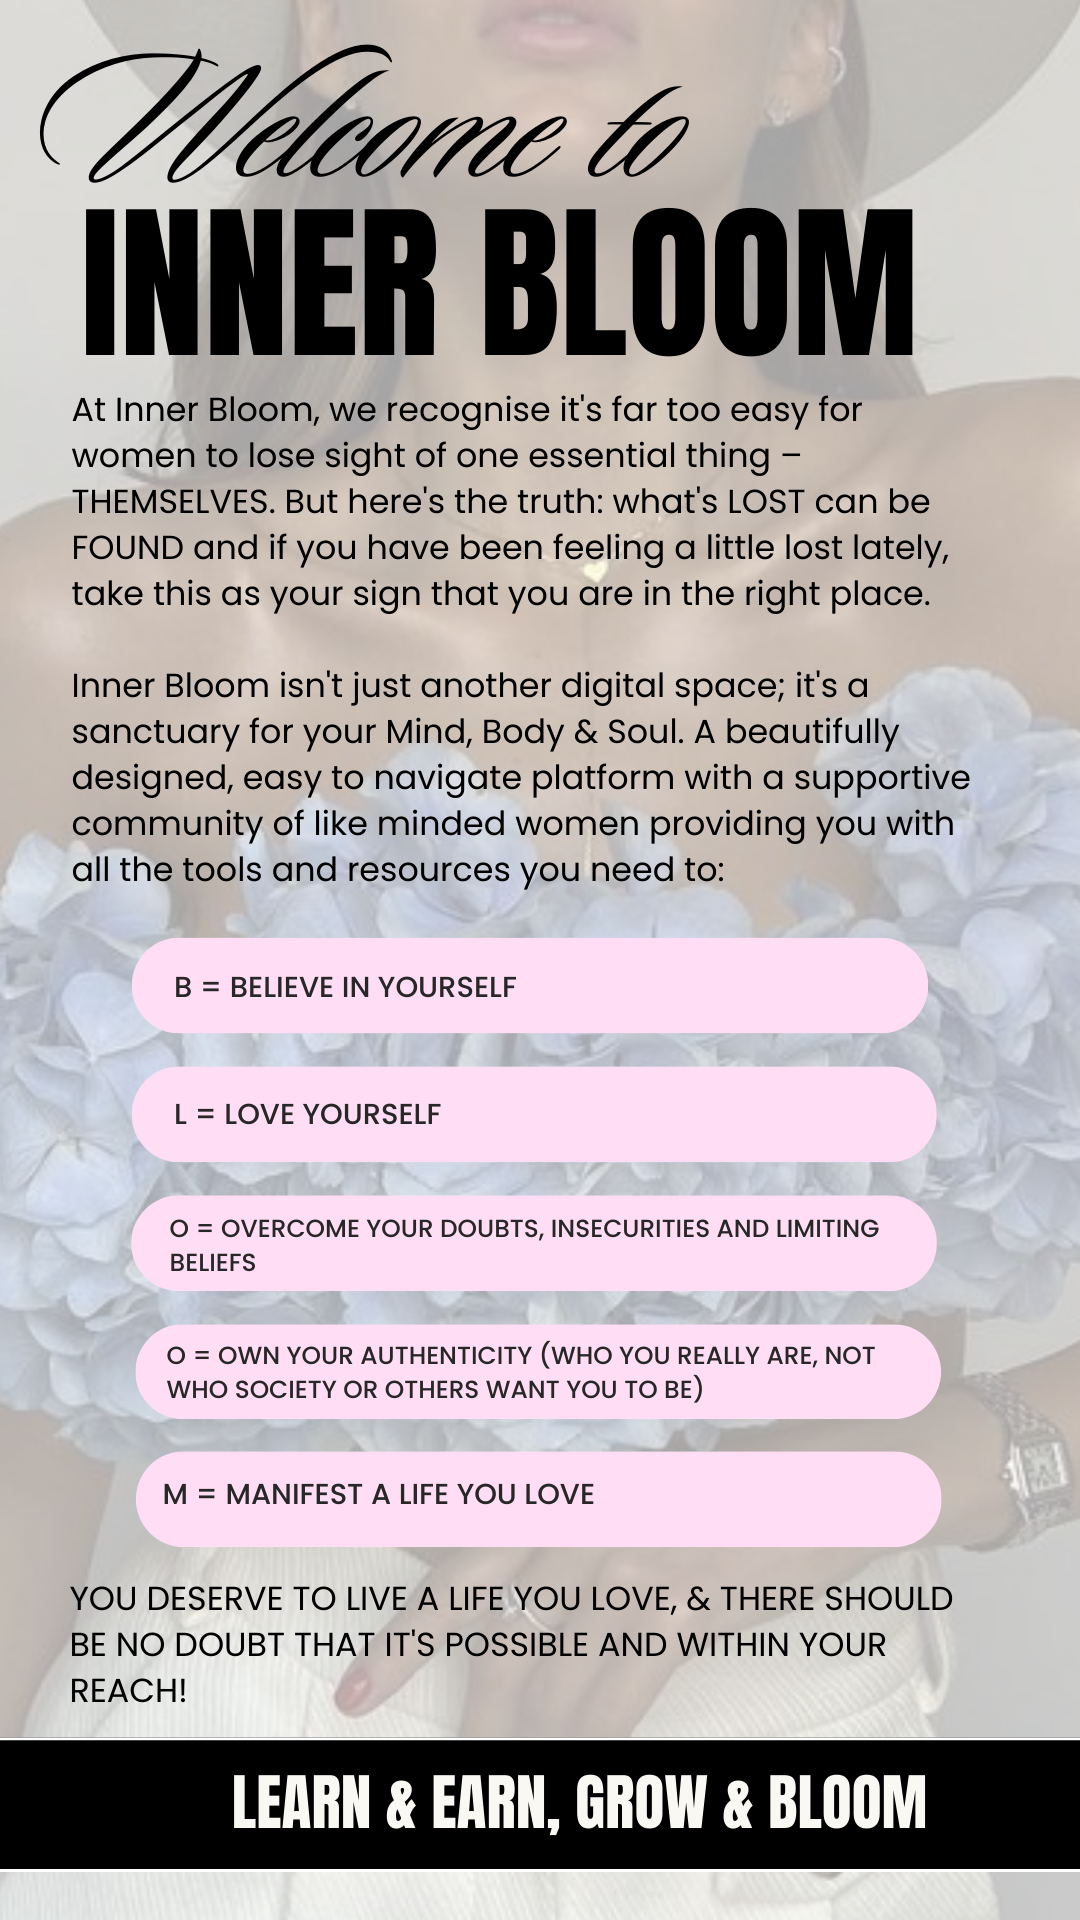 Inner Bloom: Women's Wellbeing Academy | Health, Wellbeing & Digital Marketing Course with 100% Master Resell Rights (MRR)